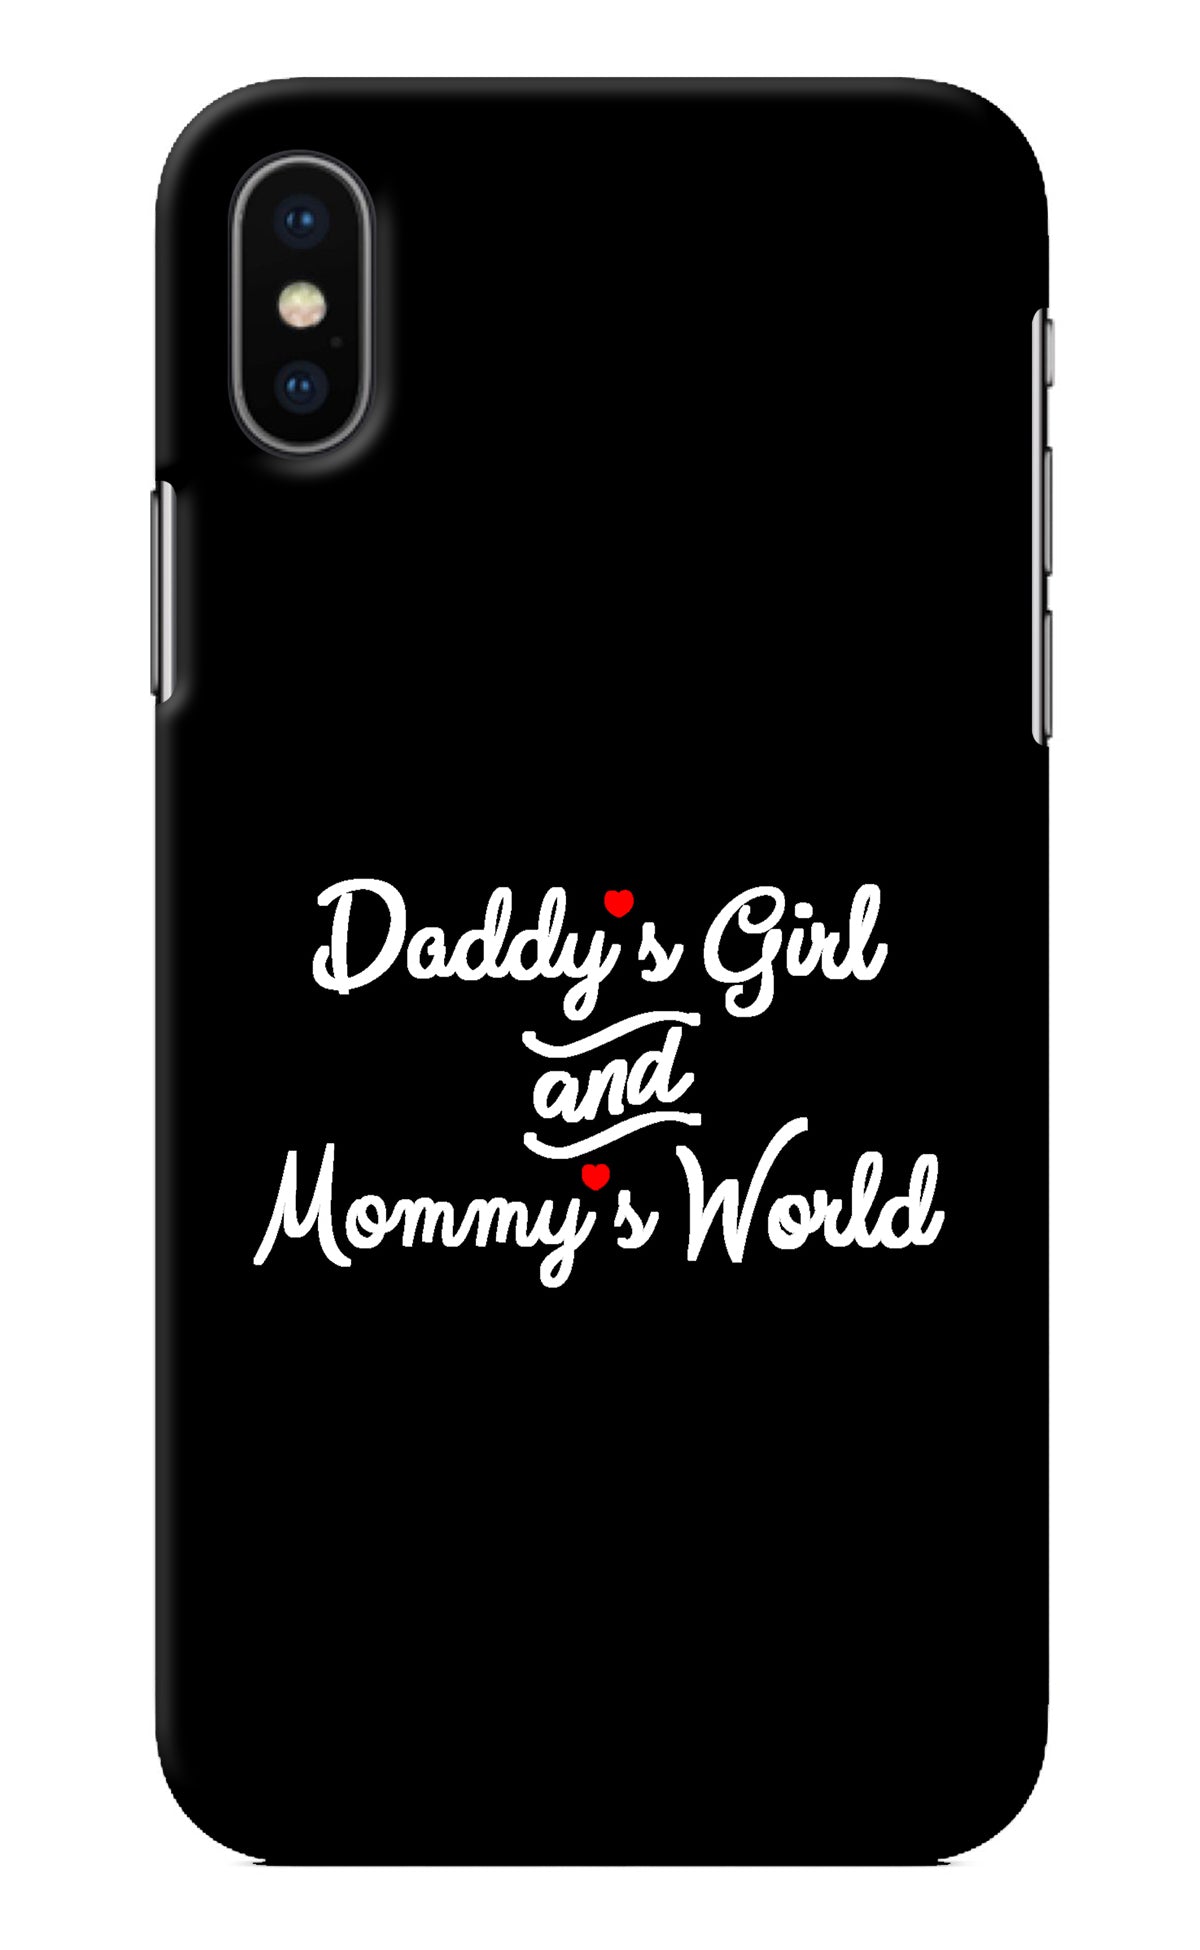 Daddy's Girl and Mommy's World iPhone X Back Cover